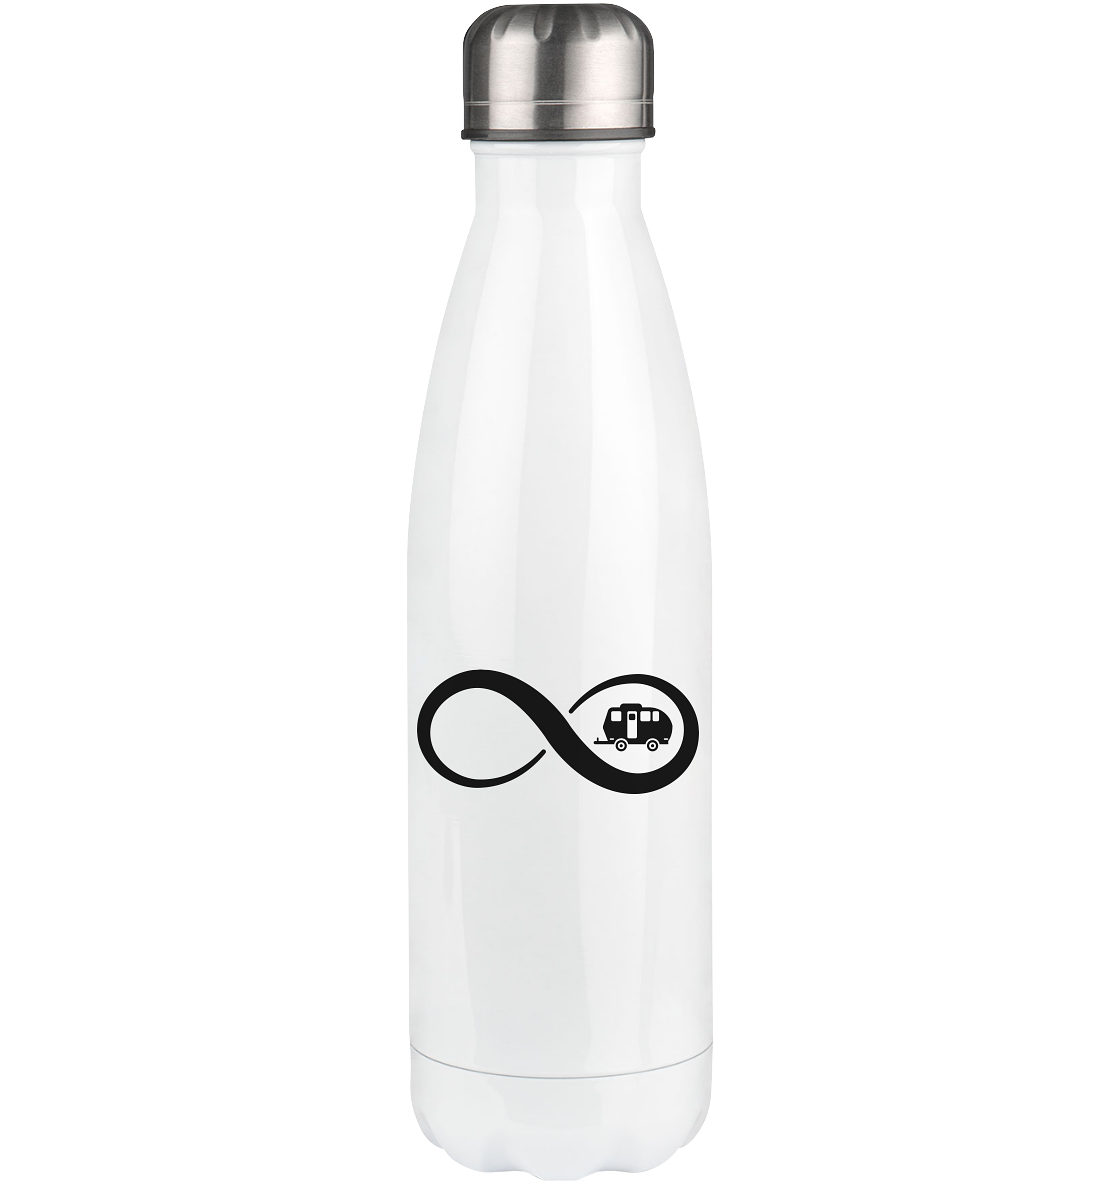 Infinity and Camping 2 - Edelstahl Thermosflasche camping UONP 500ml